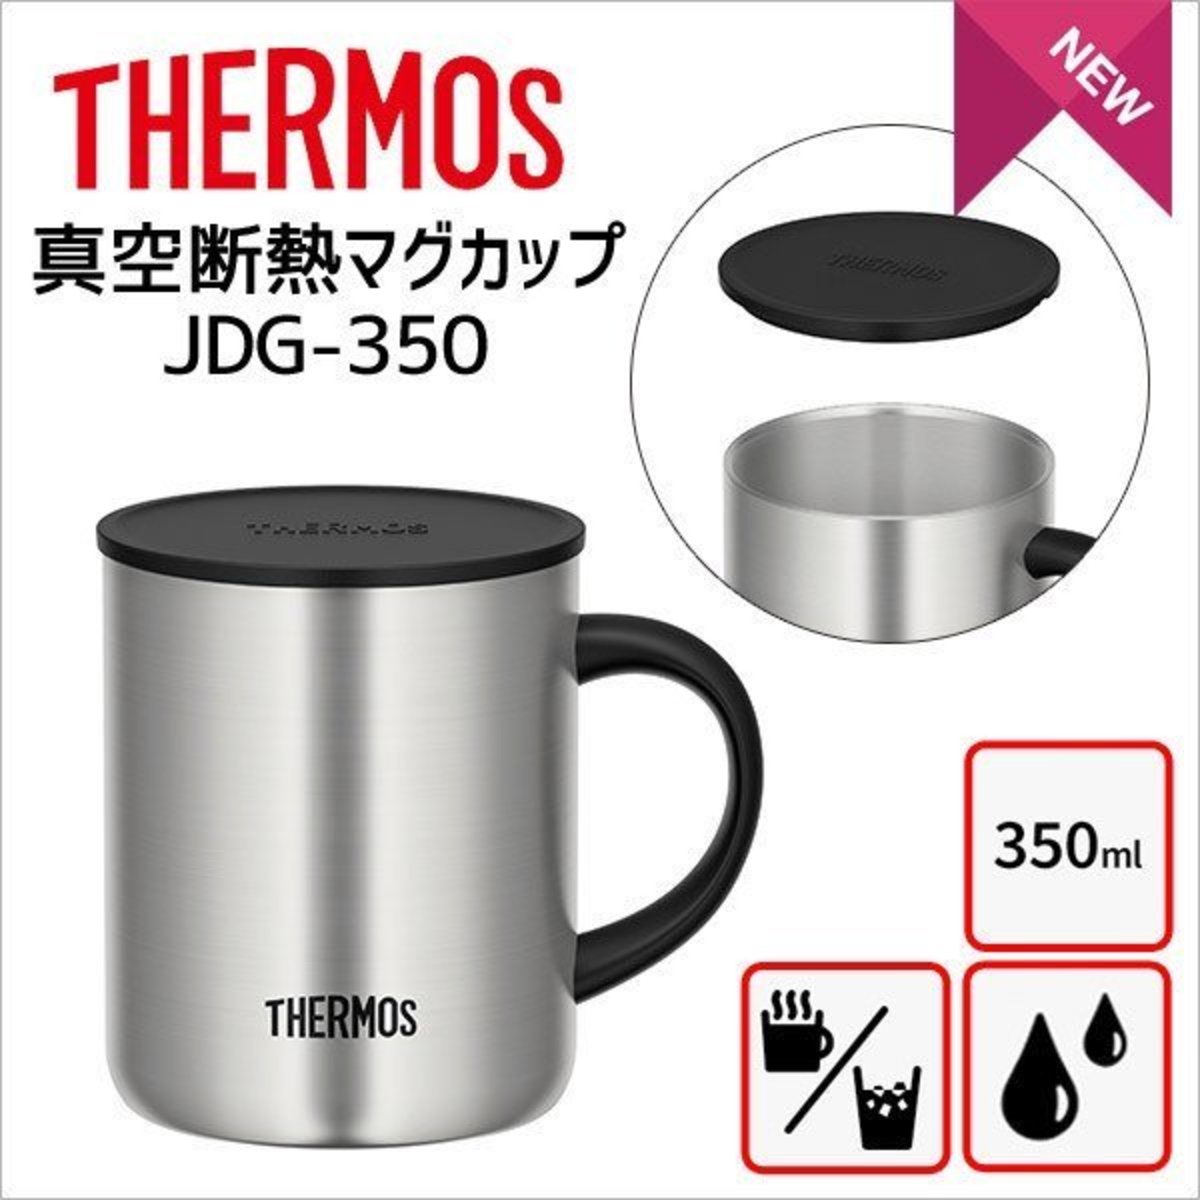 THERMOS | (Silver) Japan THERMOS Stainless Steel Vacuum Insulated Cup .